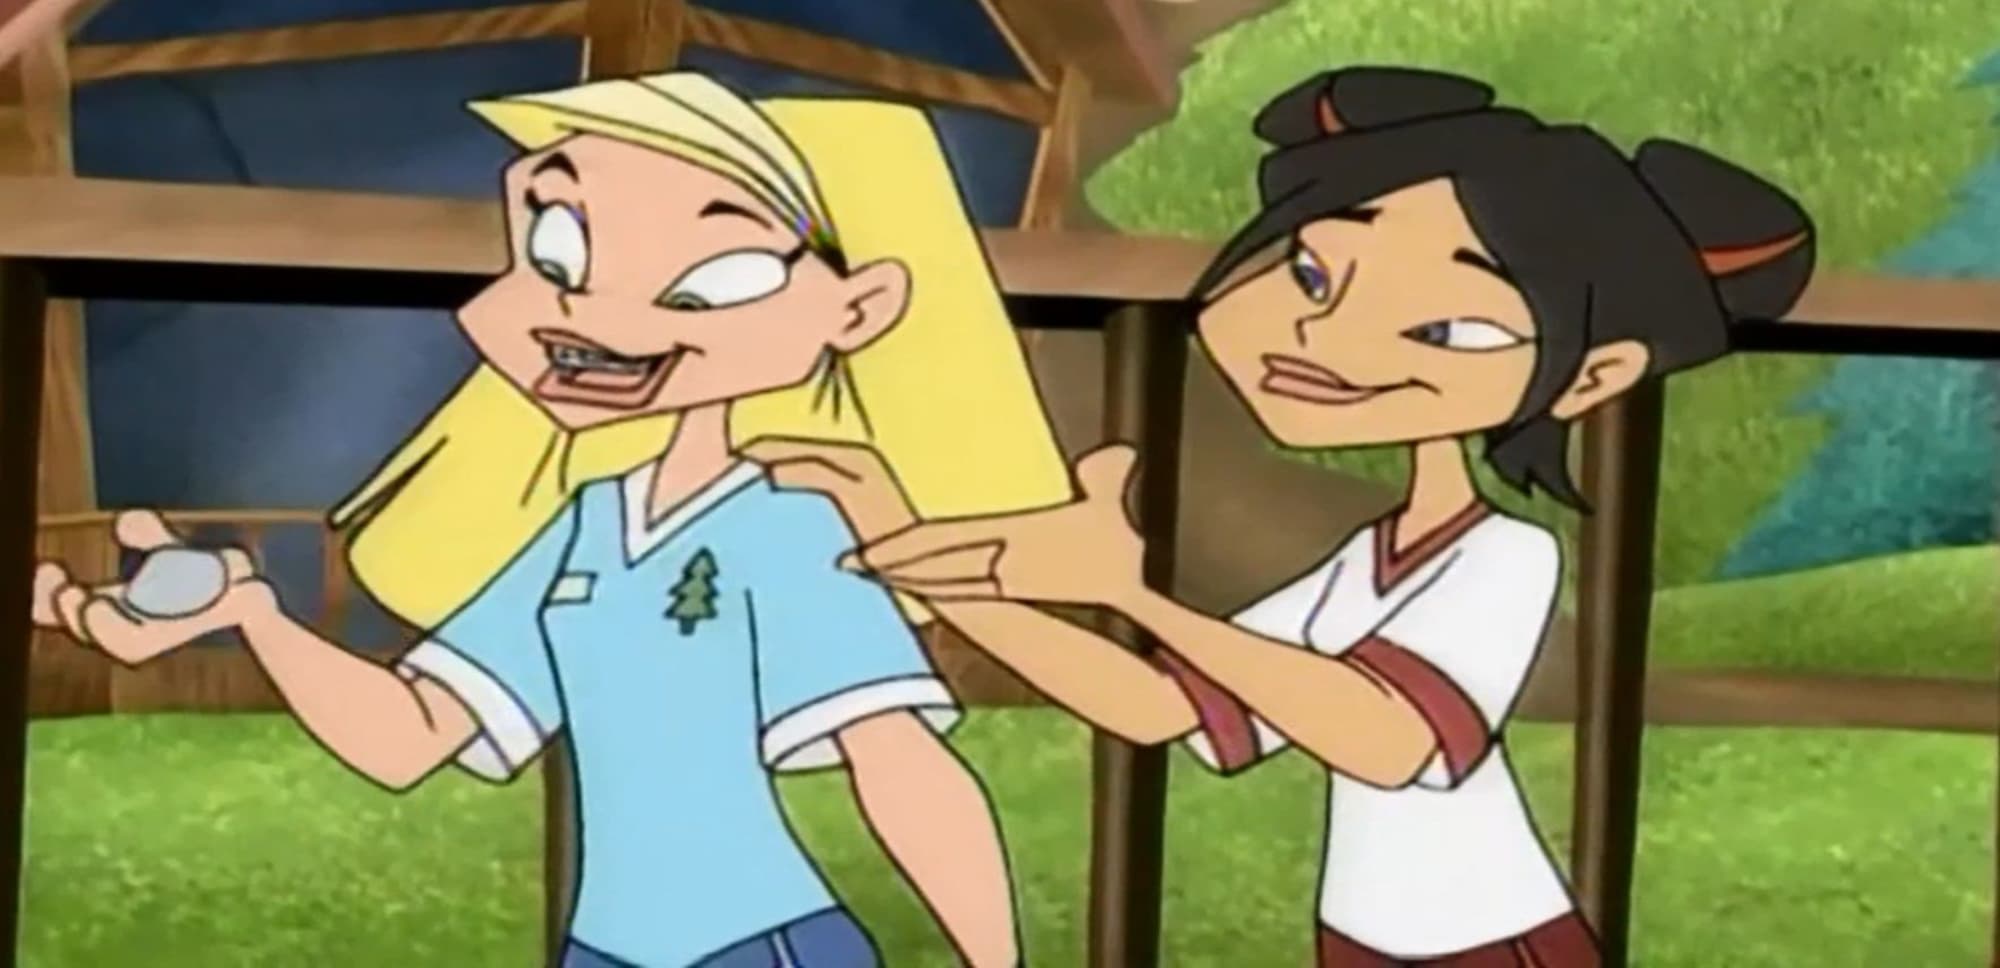 15 of the most underrated cartoons of the '90s and '00s